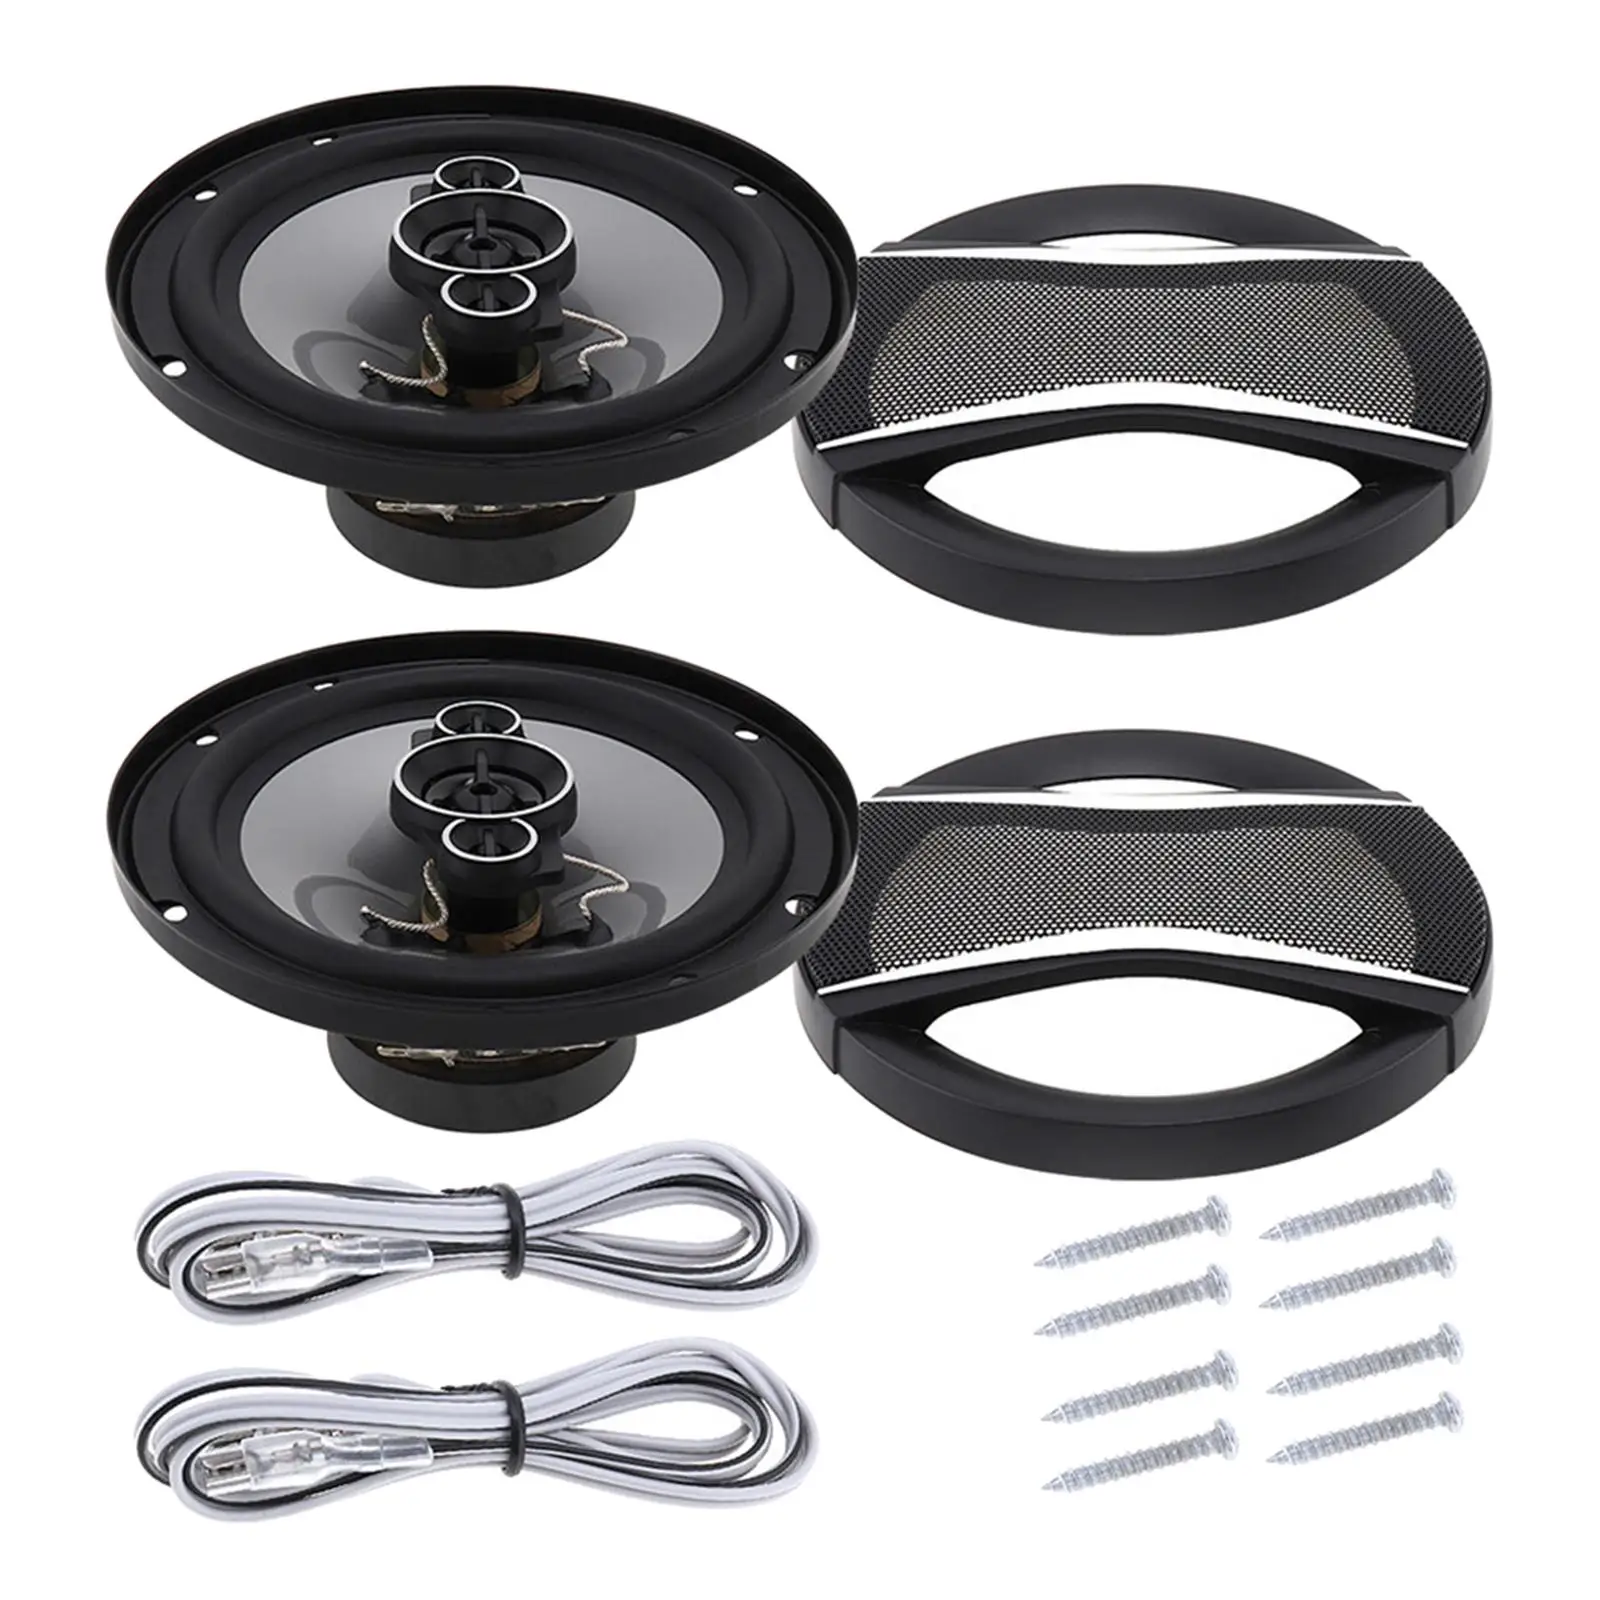 2 Pieces Auto Stereo Speakers Universal Car HiFi Vehicle